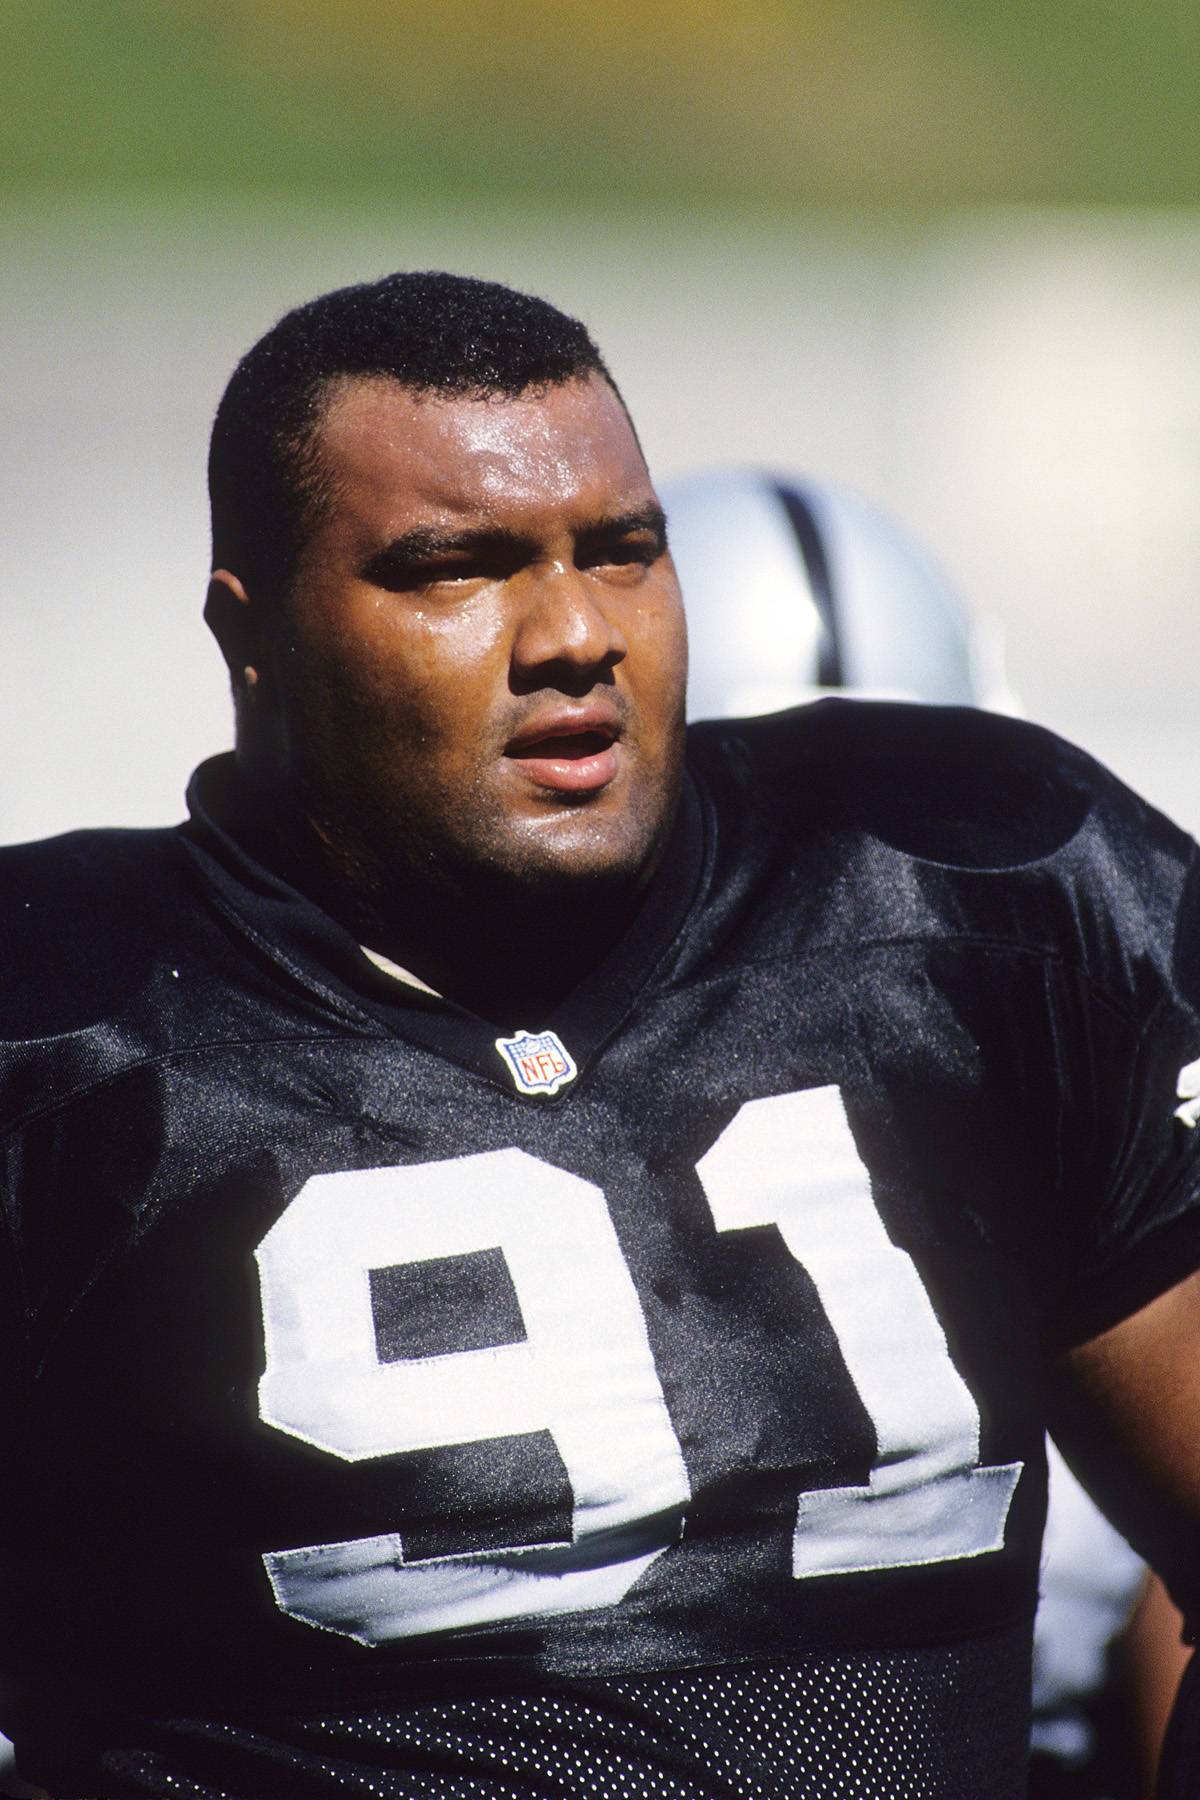 Chester McGlockton - Chester McGlockton, 42, a four-time Pro Bowl defensive lineman and former assistant coach and mentor at Stanford University, died November 30. (Photo: George Rose/Getty Images)